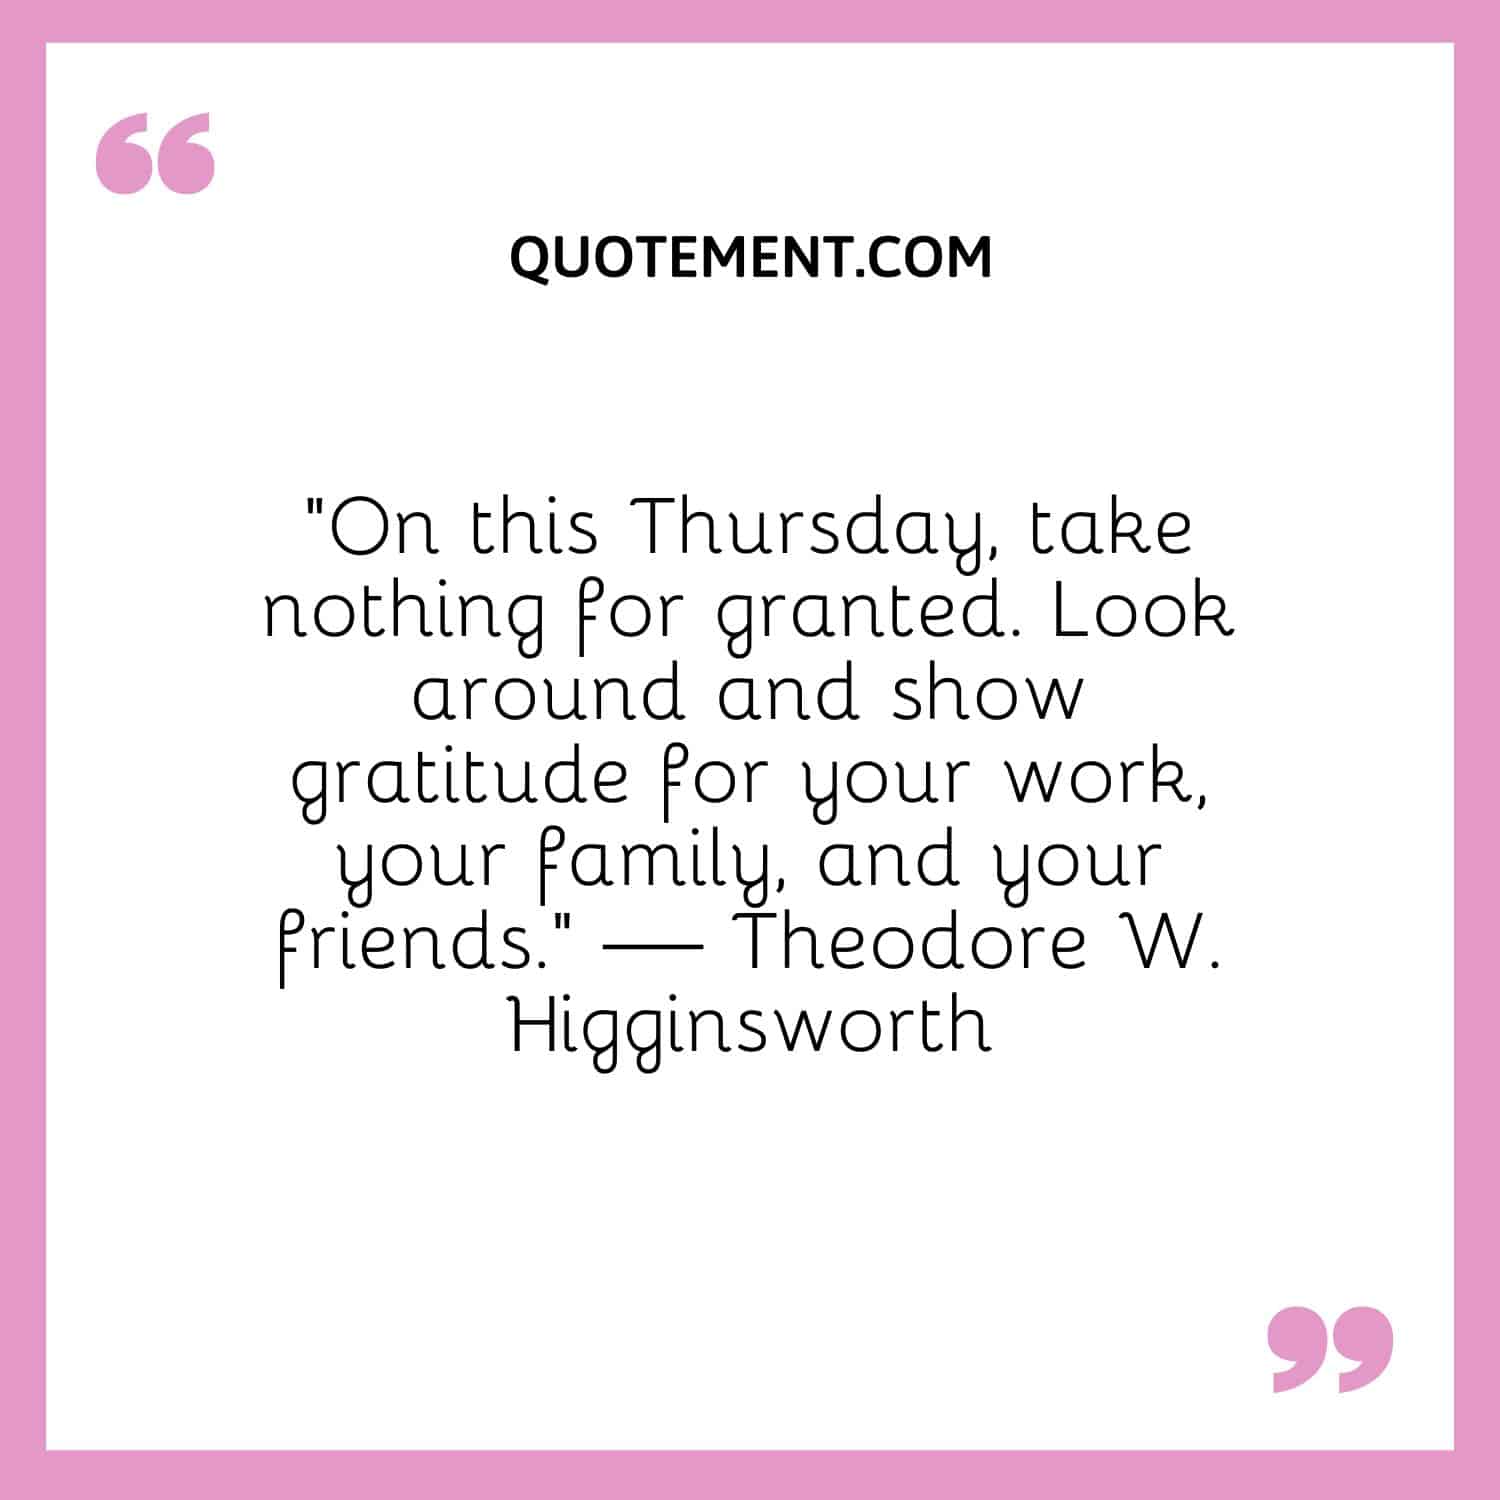 “On this Thursday, take nothing for granted. Look around and show gratitude for your work, your family, and your friends.” — Theodore W. Higginsworth